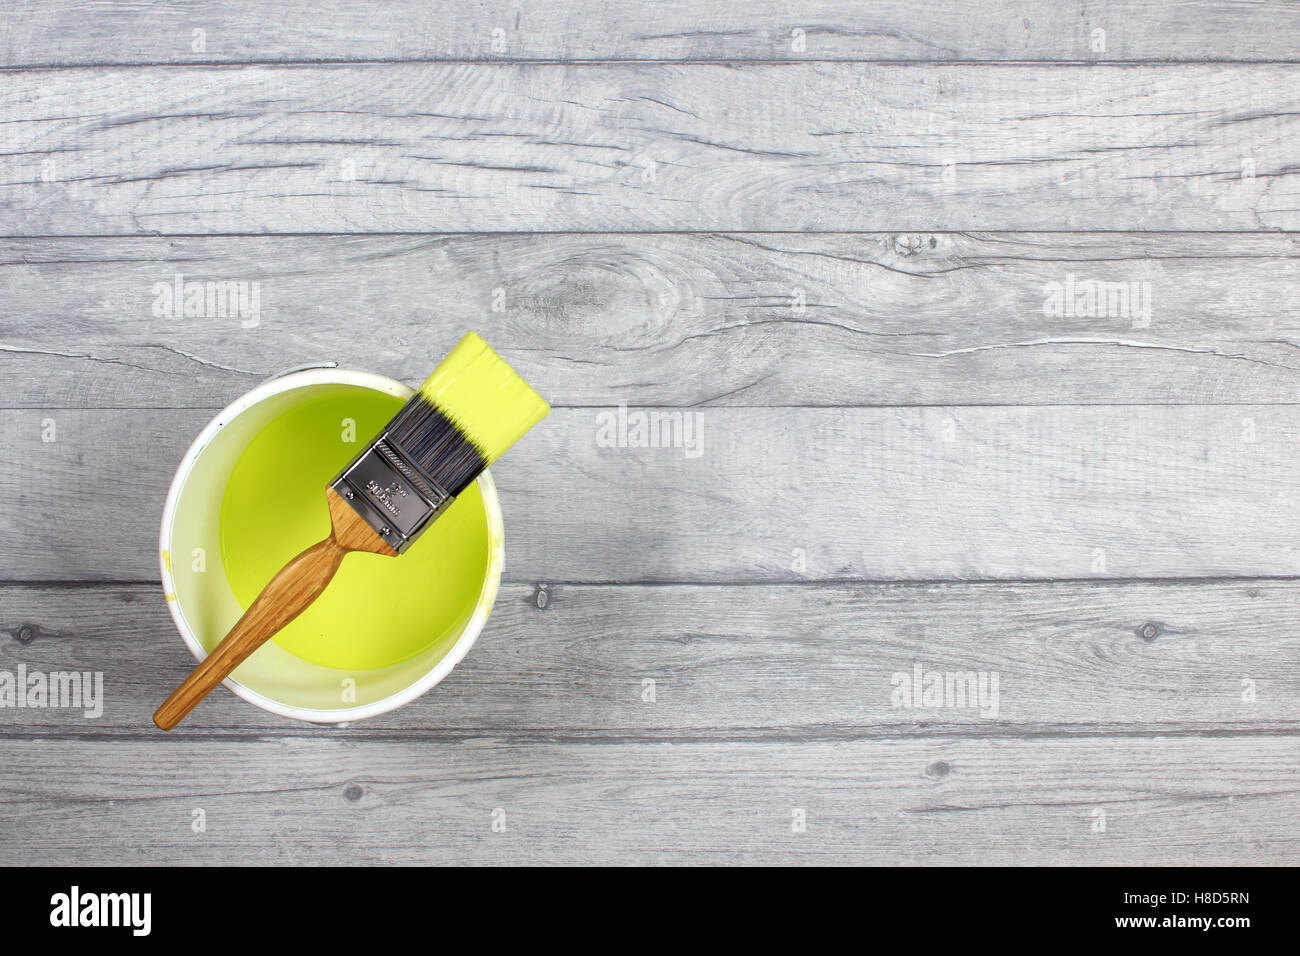 Loaded paintbrush placed across a white paint kettle filled with lime paint on a grey shabby style wood floor Stock Photo